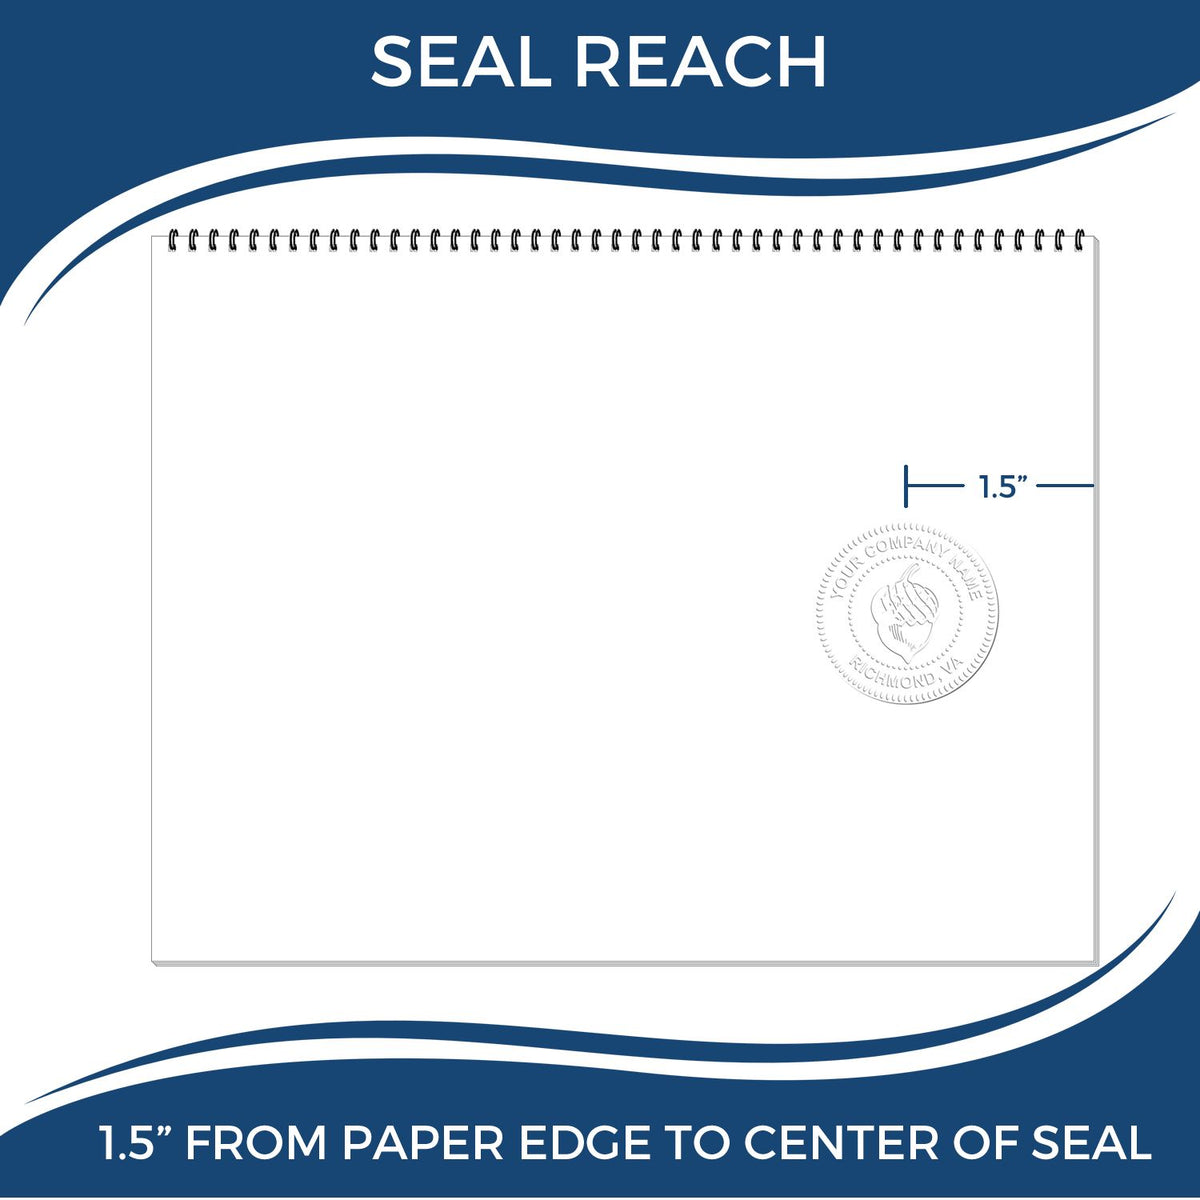 An infographic showing the seal reach which is represented by a ruler and a miniature seal image of the Handheld Texas Professional Engineer Embosser